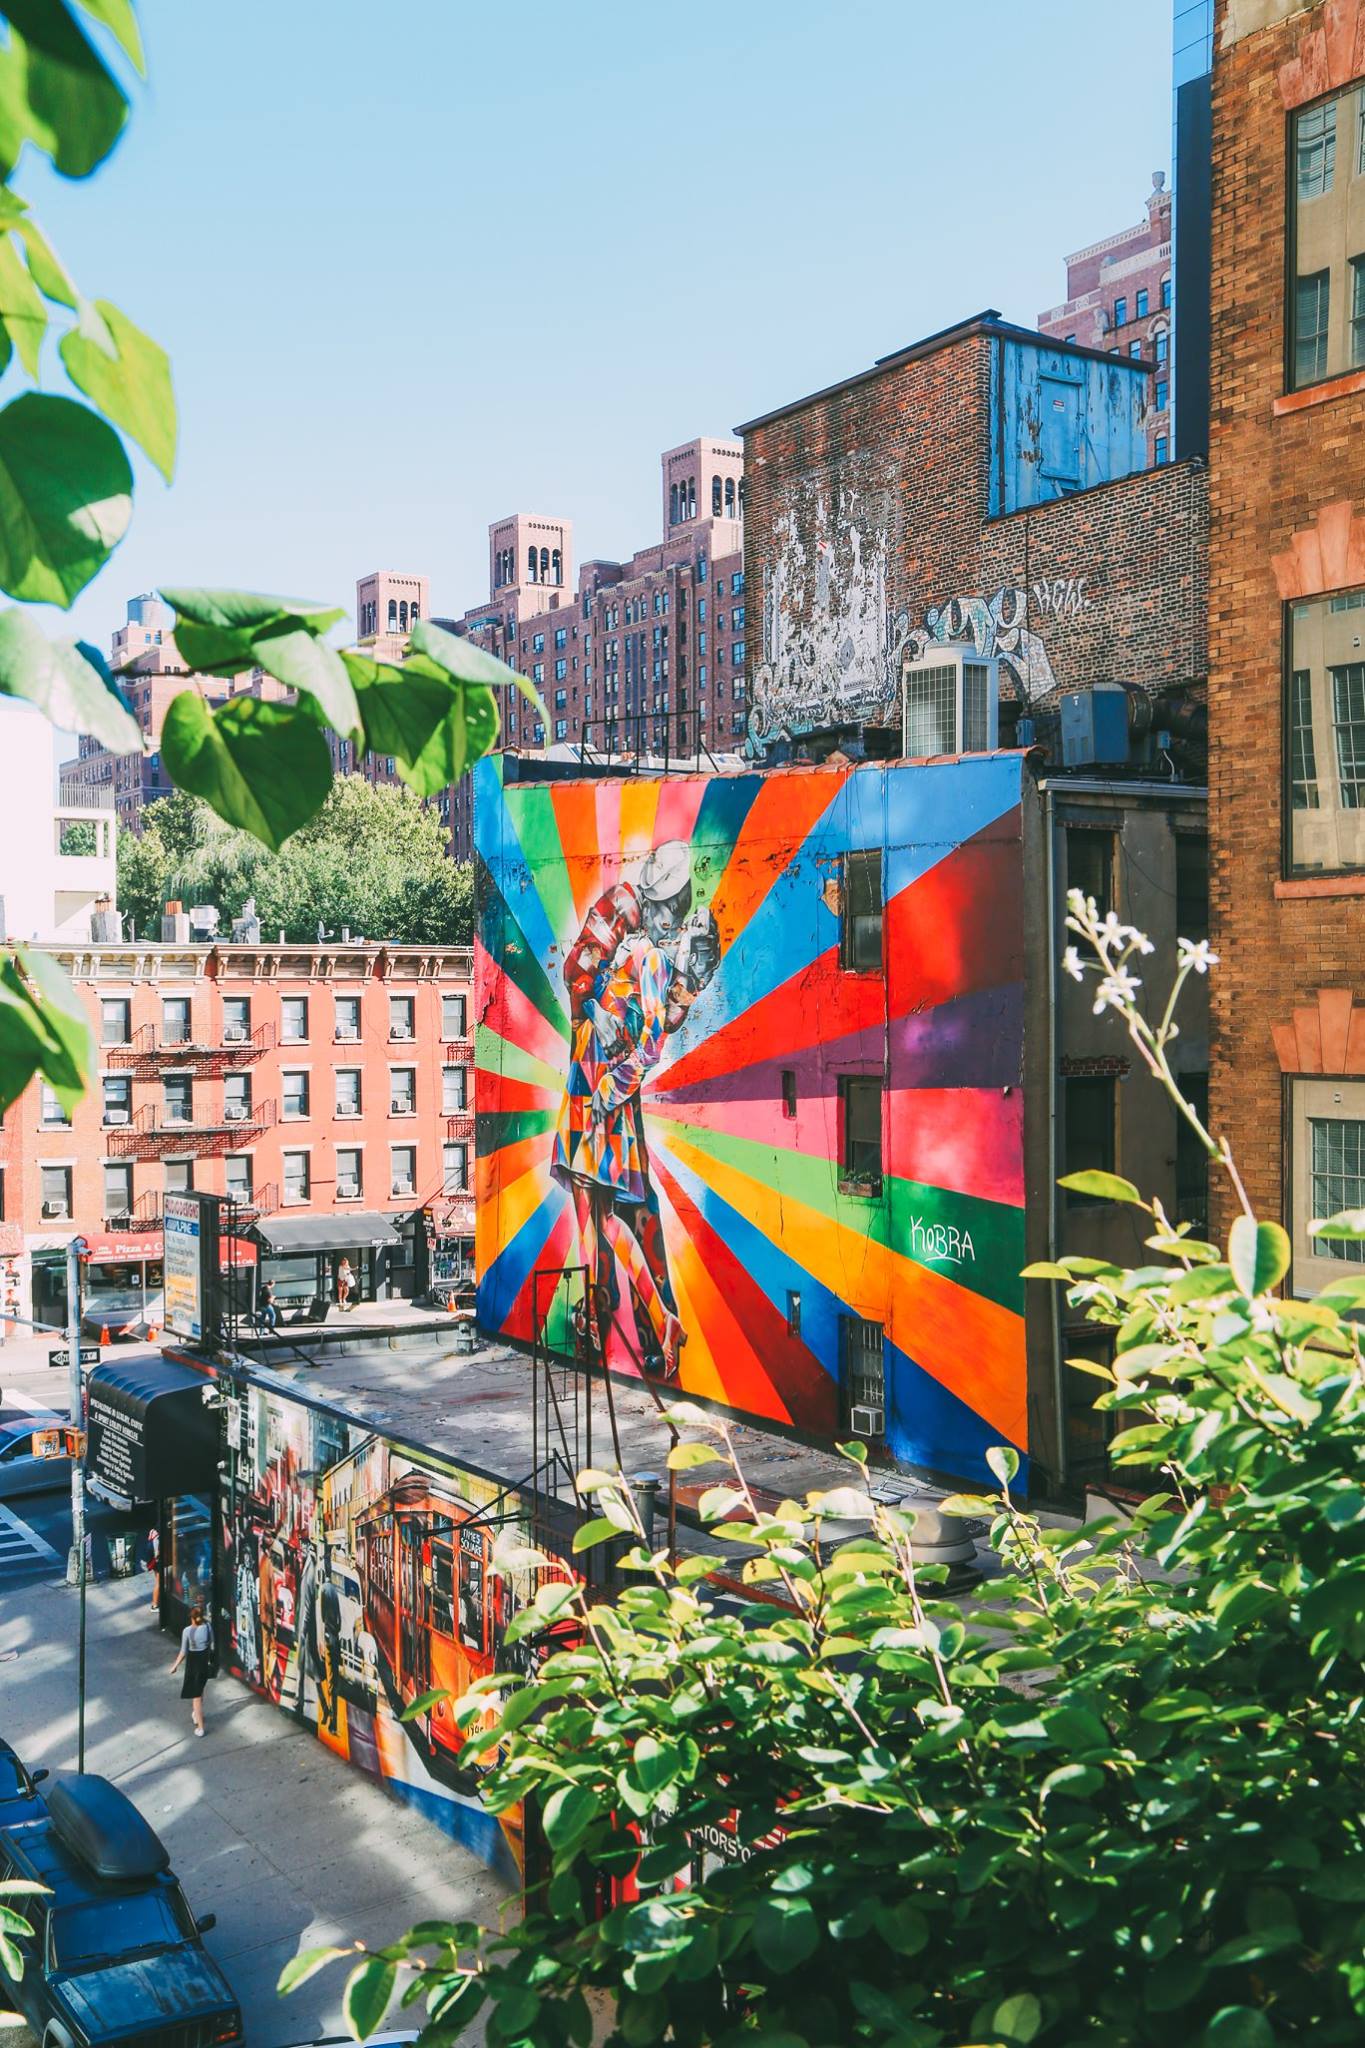 New York Diary: The High Line, Lego House And New York Fashion Week (3)